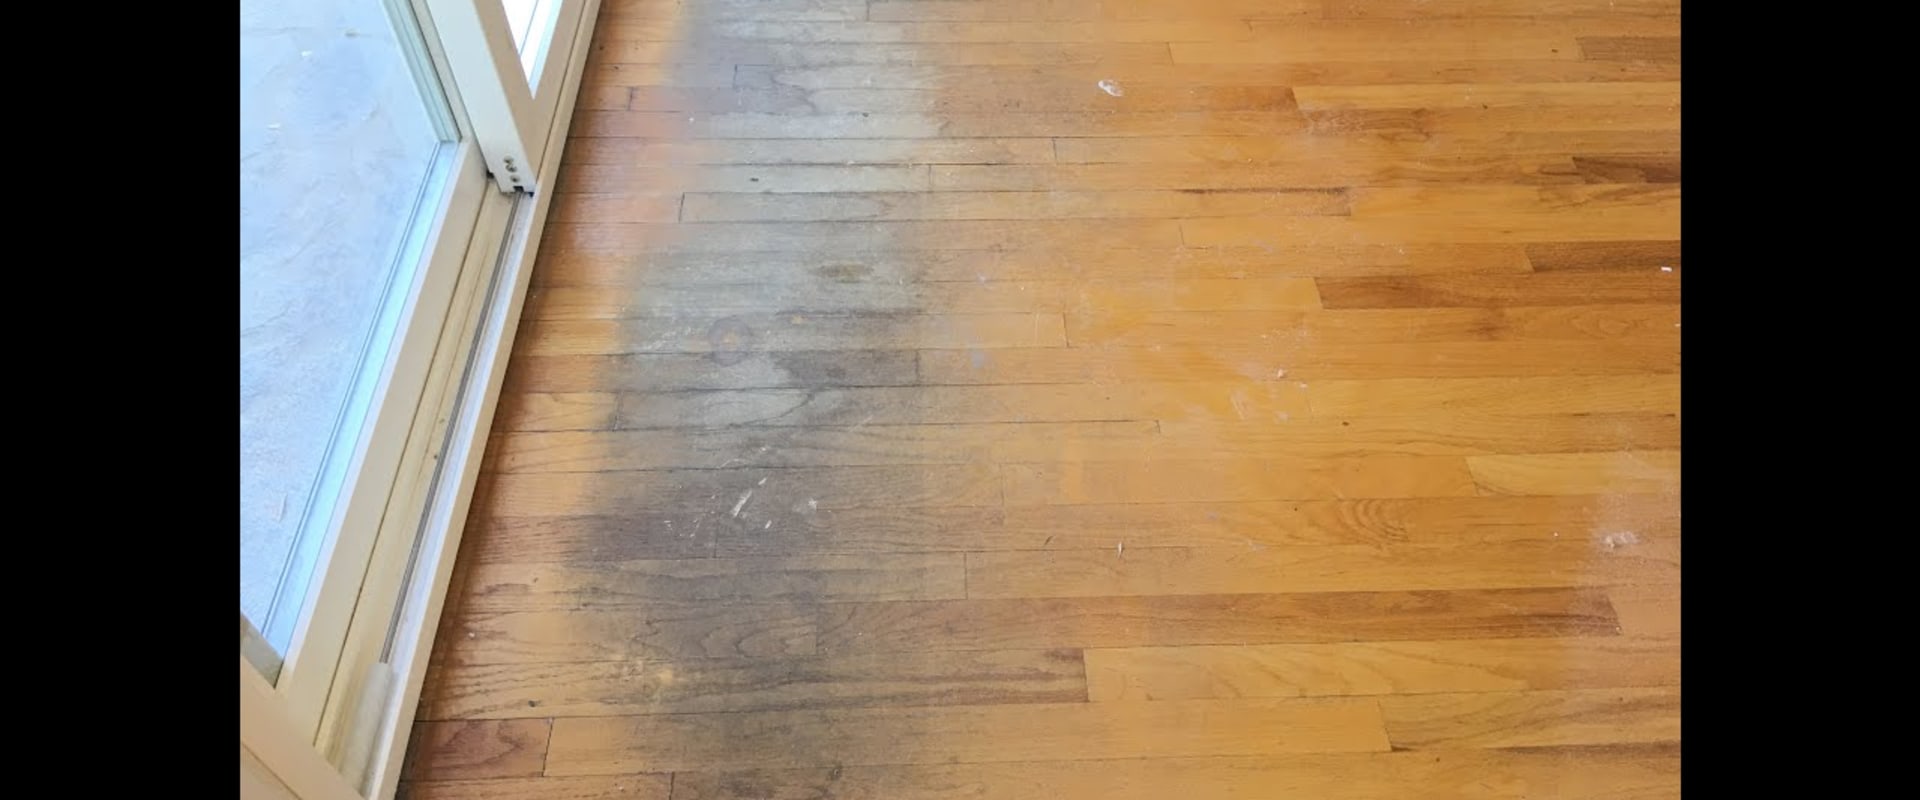 Can Damaged Wood Floors Be Refinished?